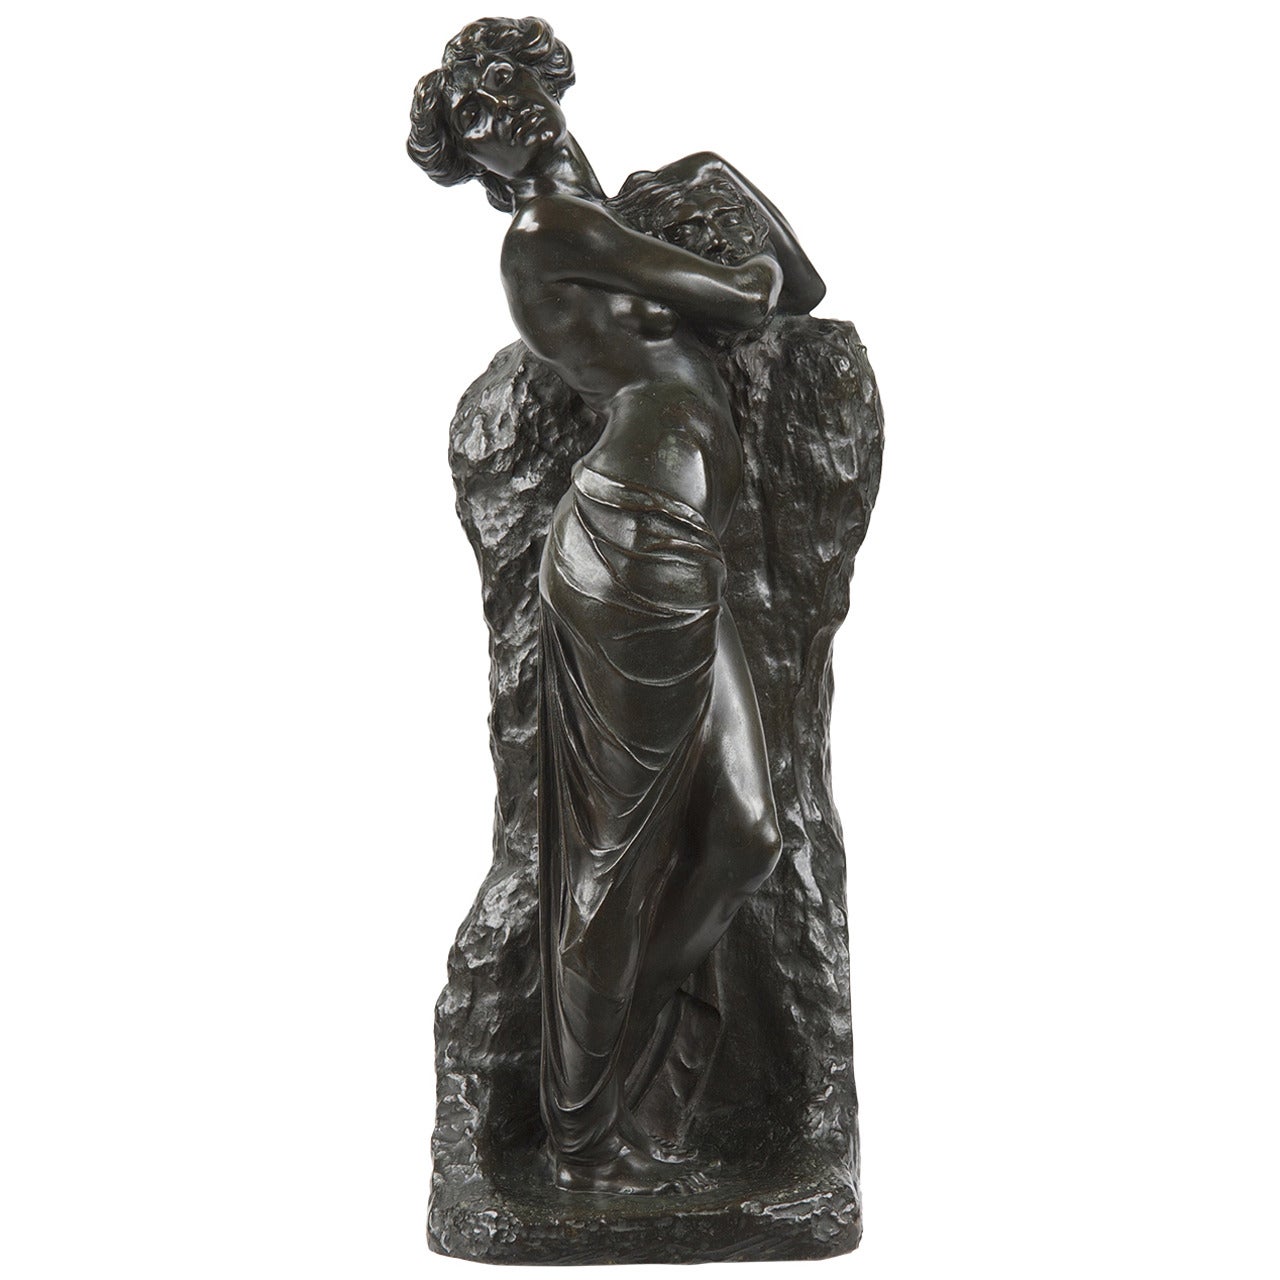 Bronze Sculpture of Salome with John the Baptist's Head by Philipp Modrow